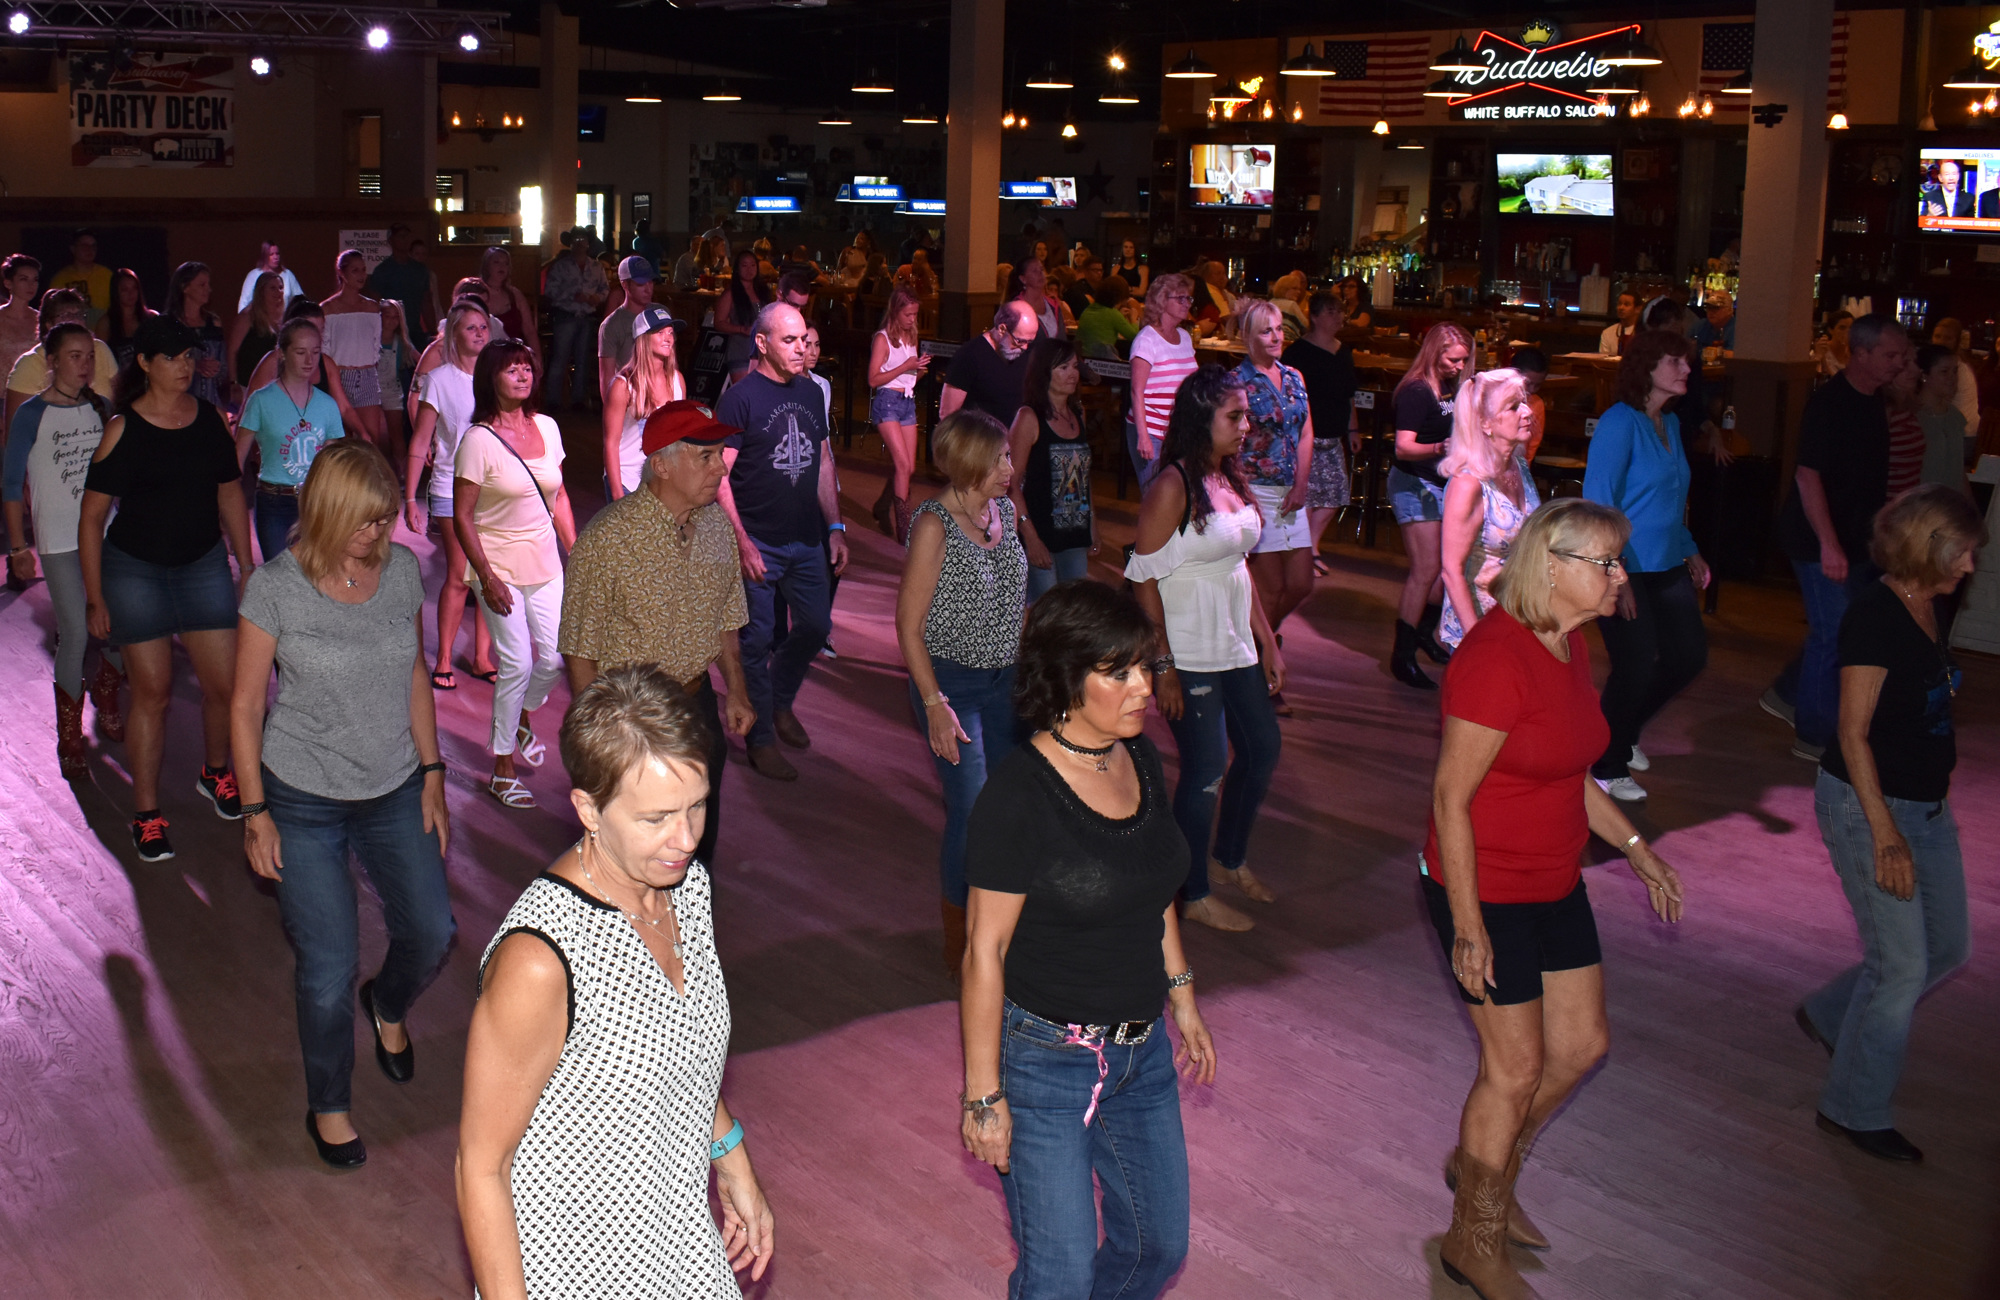 Line-dancing lessons at White Buffalo Saloon are two hours long, though you can jump in at any time, and are followed by an evening of line dancing sans instruction. Photo by Niki Kottmann